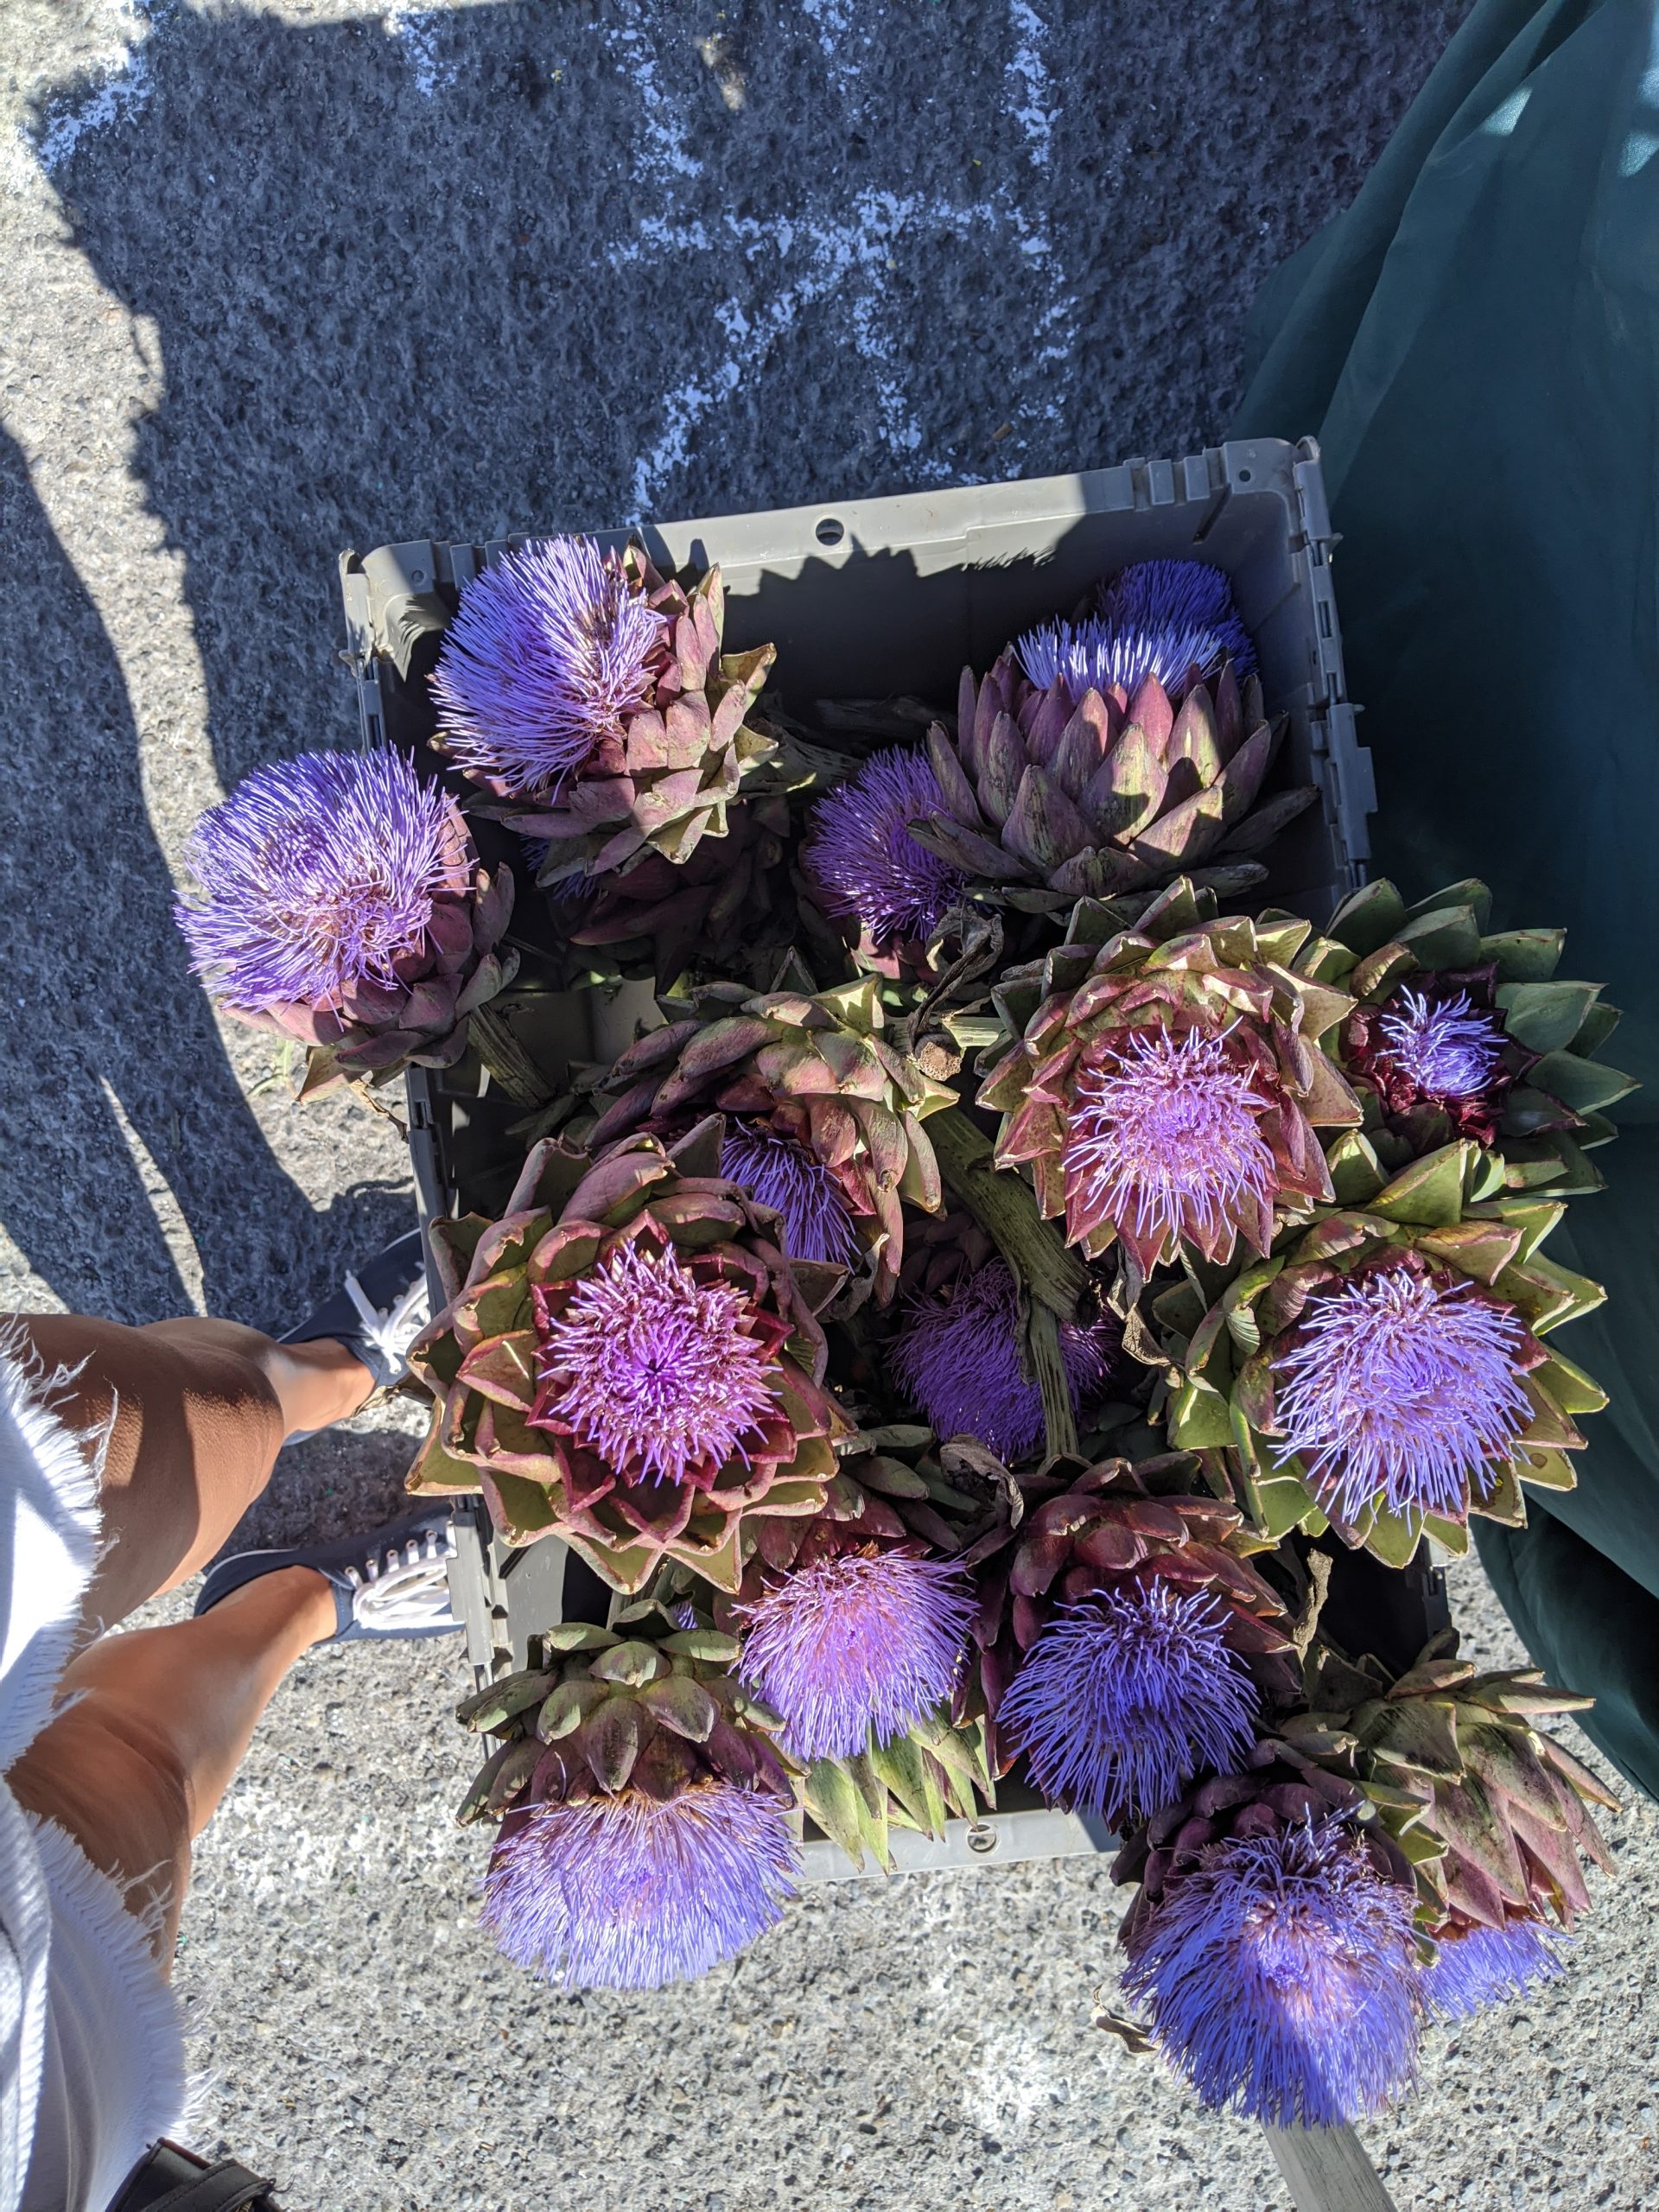 A crate of purple artichoke flowers from above.